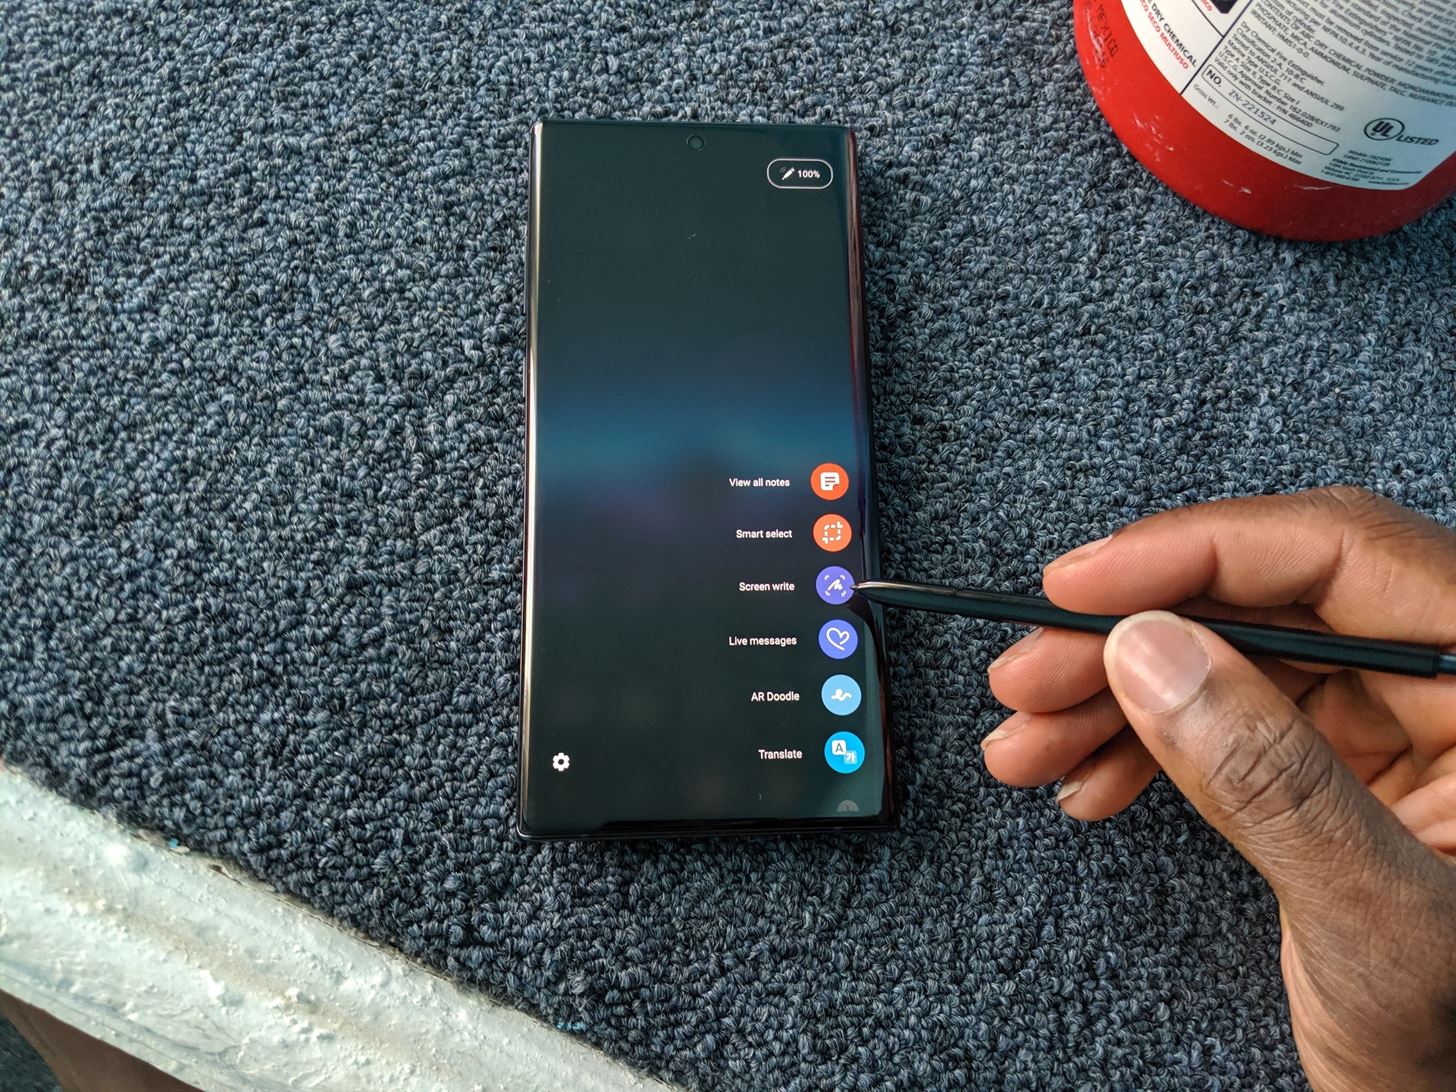 How to Take Screenshots on the Galaxy Note 10 or Note 10+